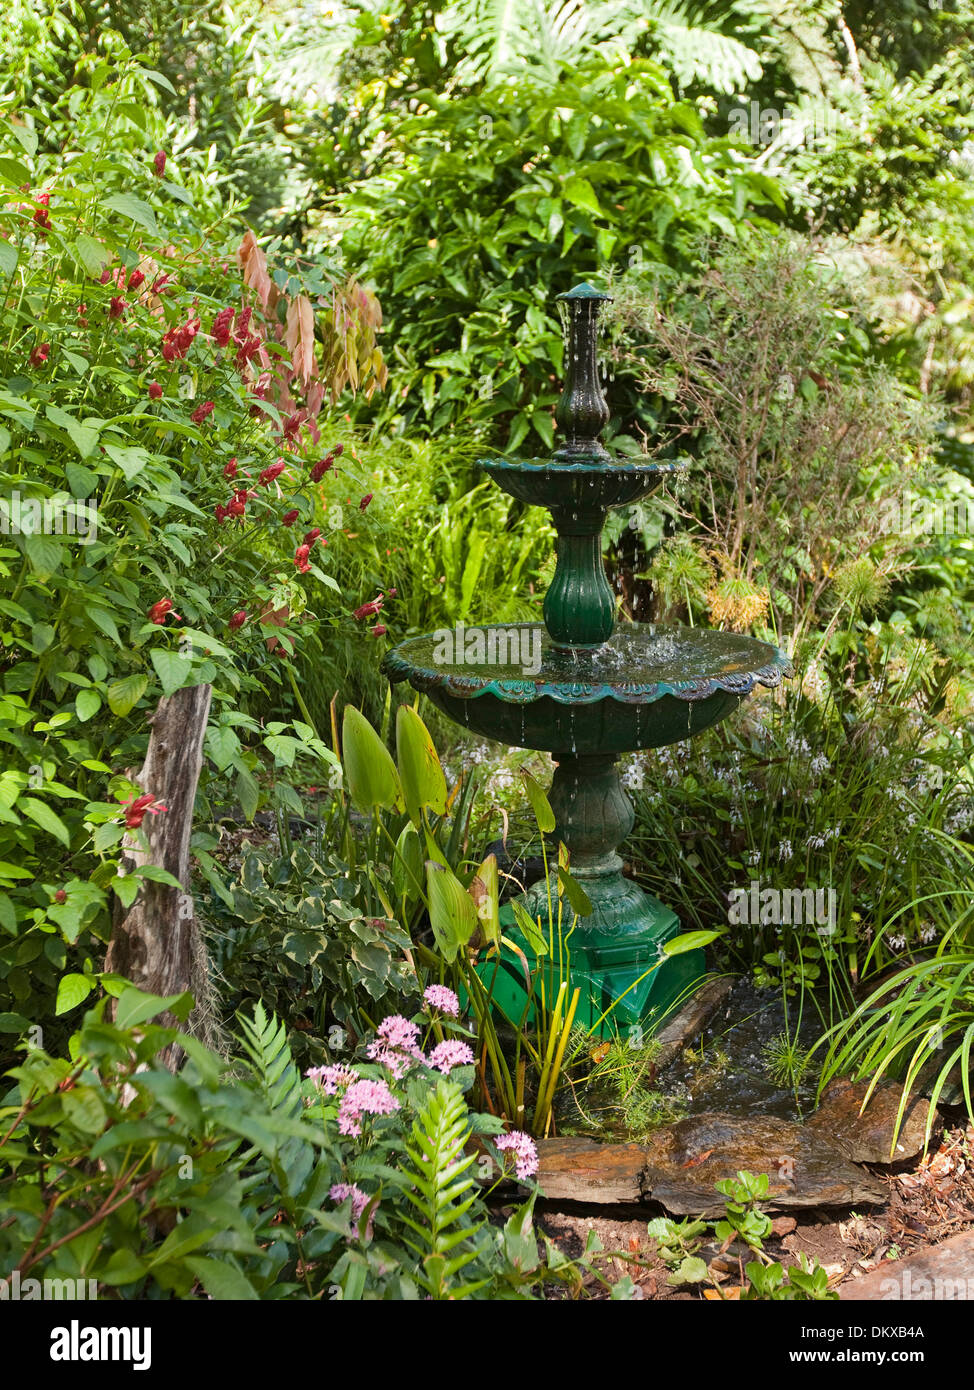 Spectacular lush sub-tropical garden with decorative fountain water feature, emerald foliage, flowering shrubs and perennials Stock Photo